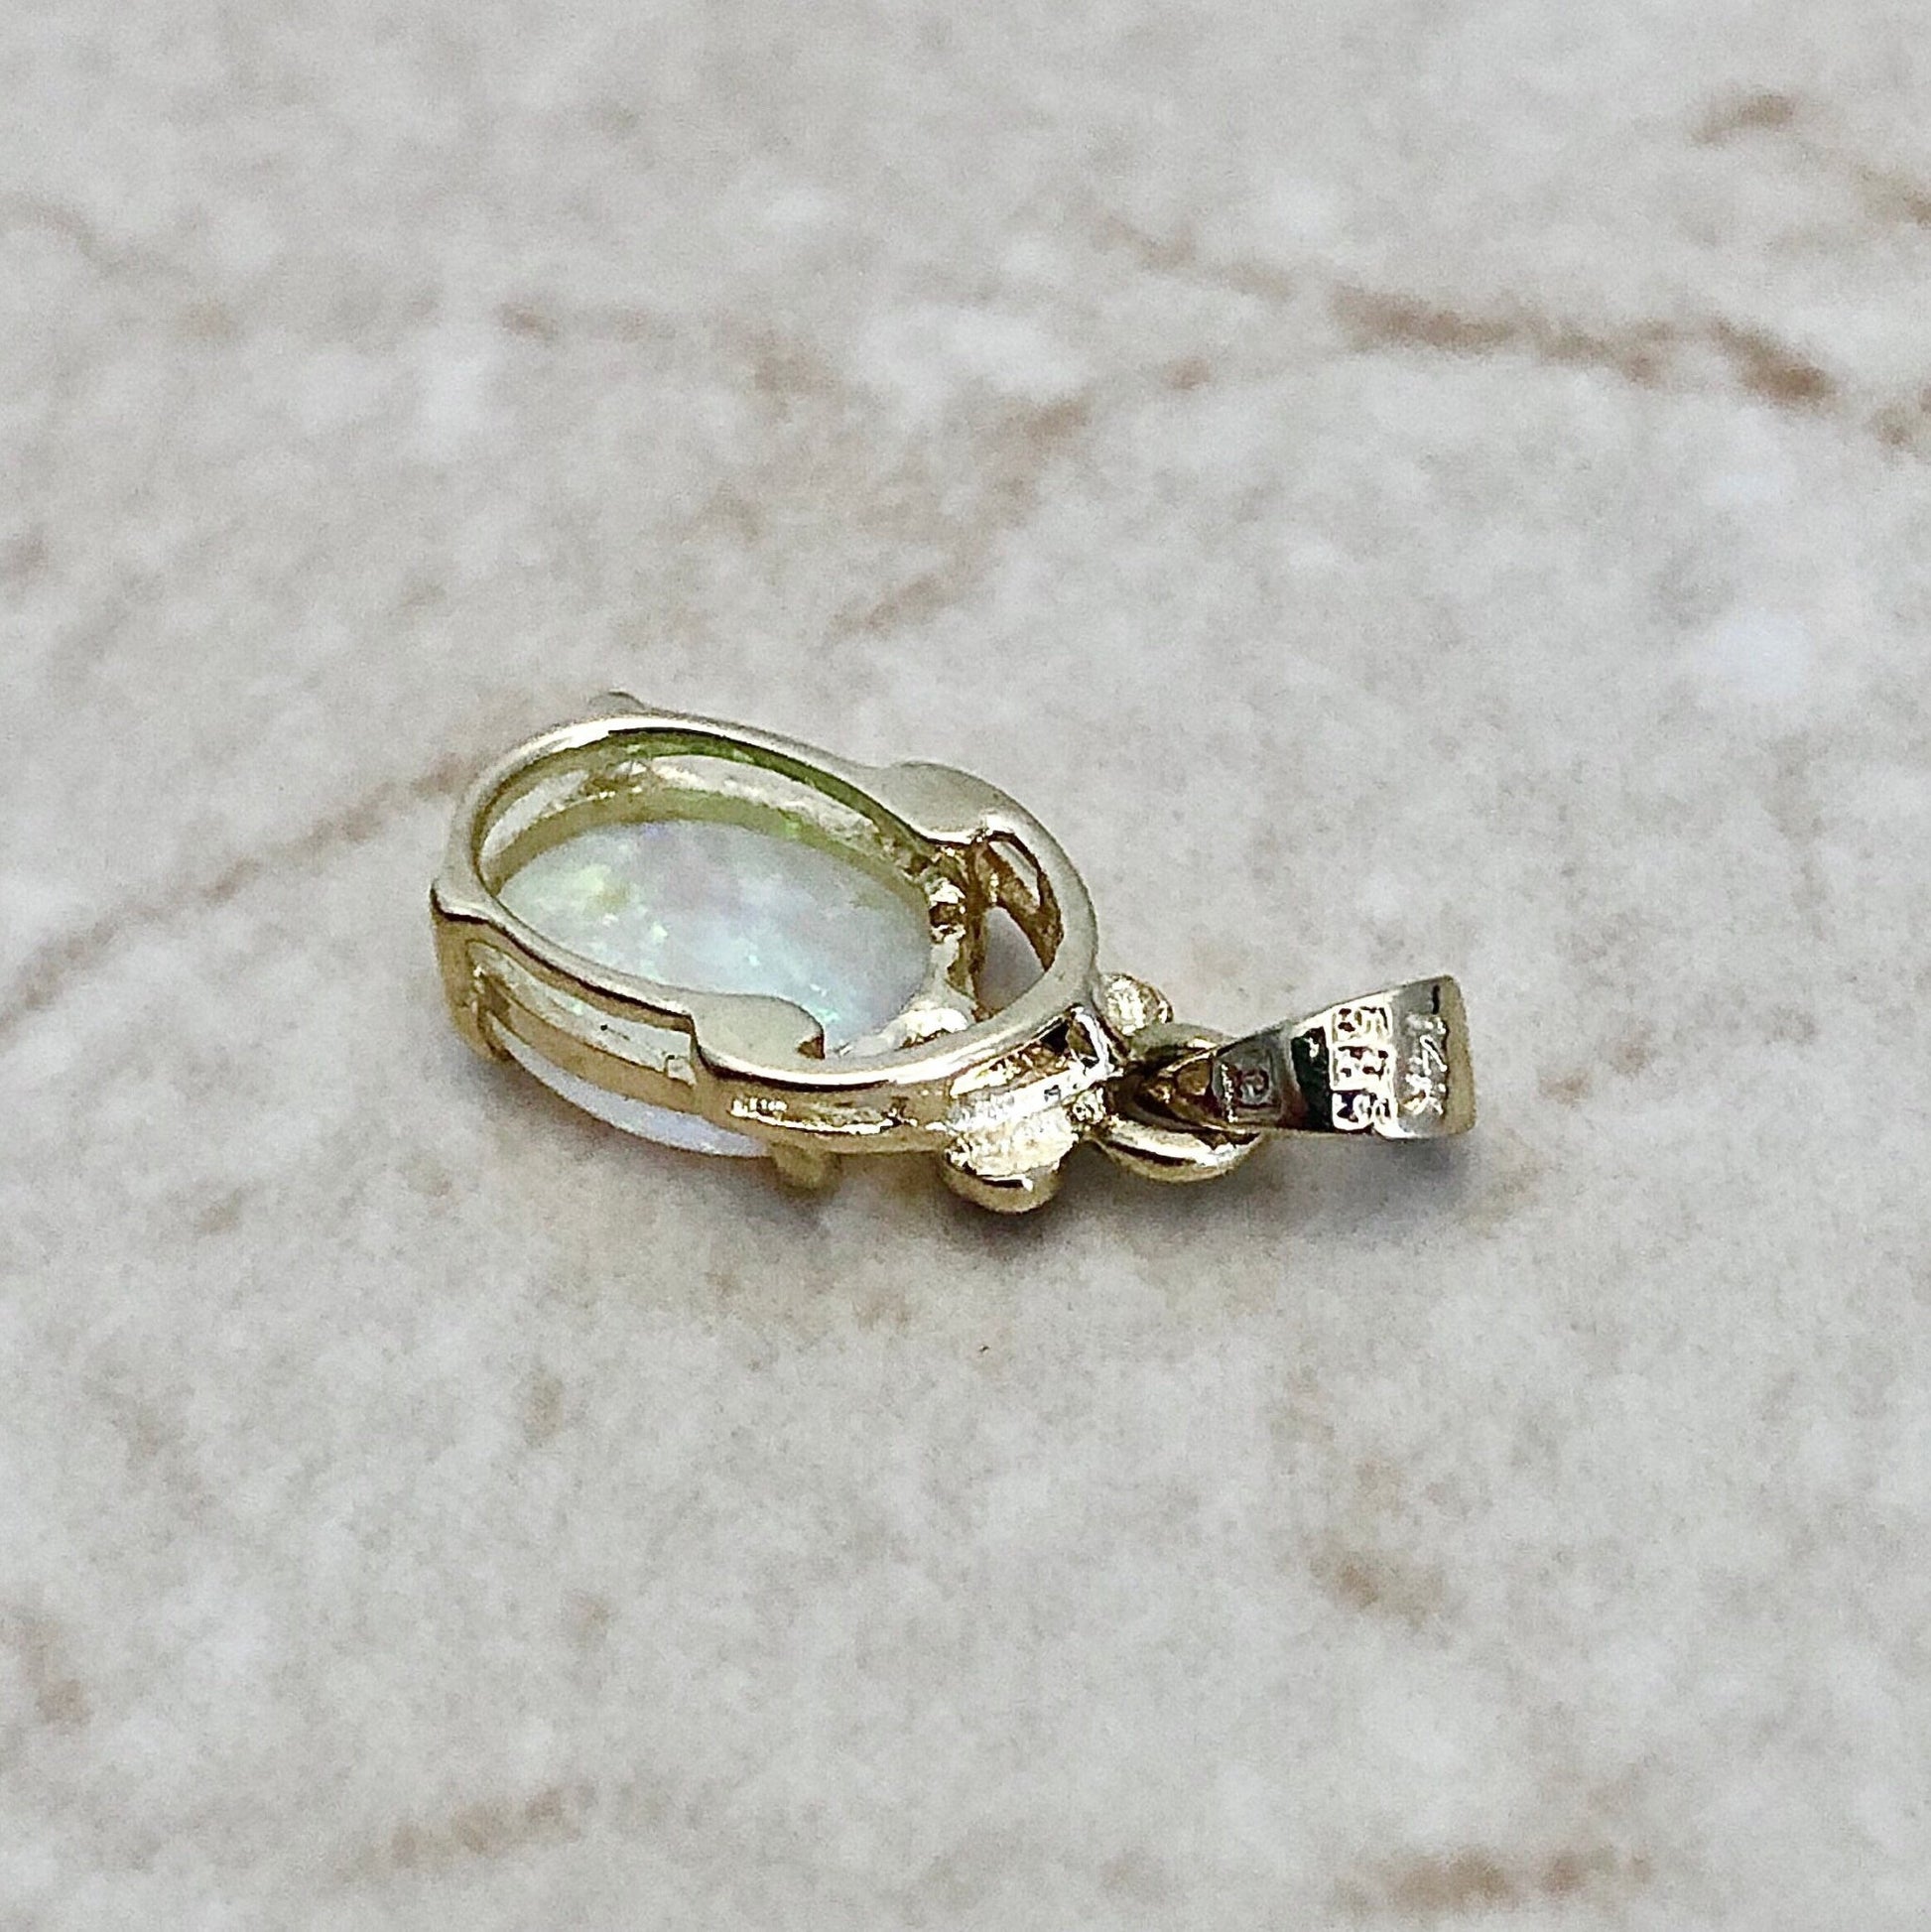 Vintage Natural Opal & Diamond Pendant Necklace - 14K Two Tone Gold - October Birthstone - Birthday Gift